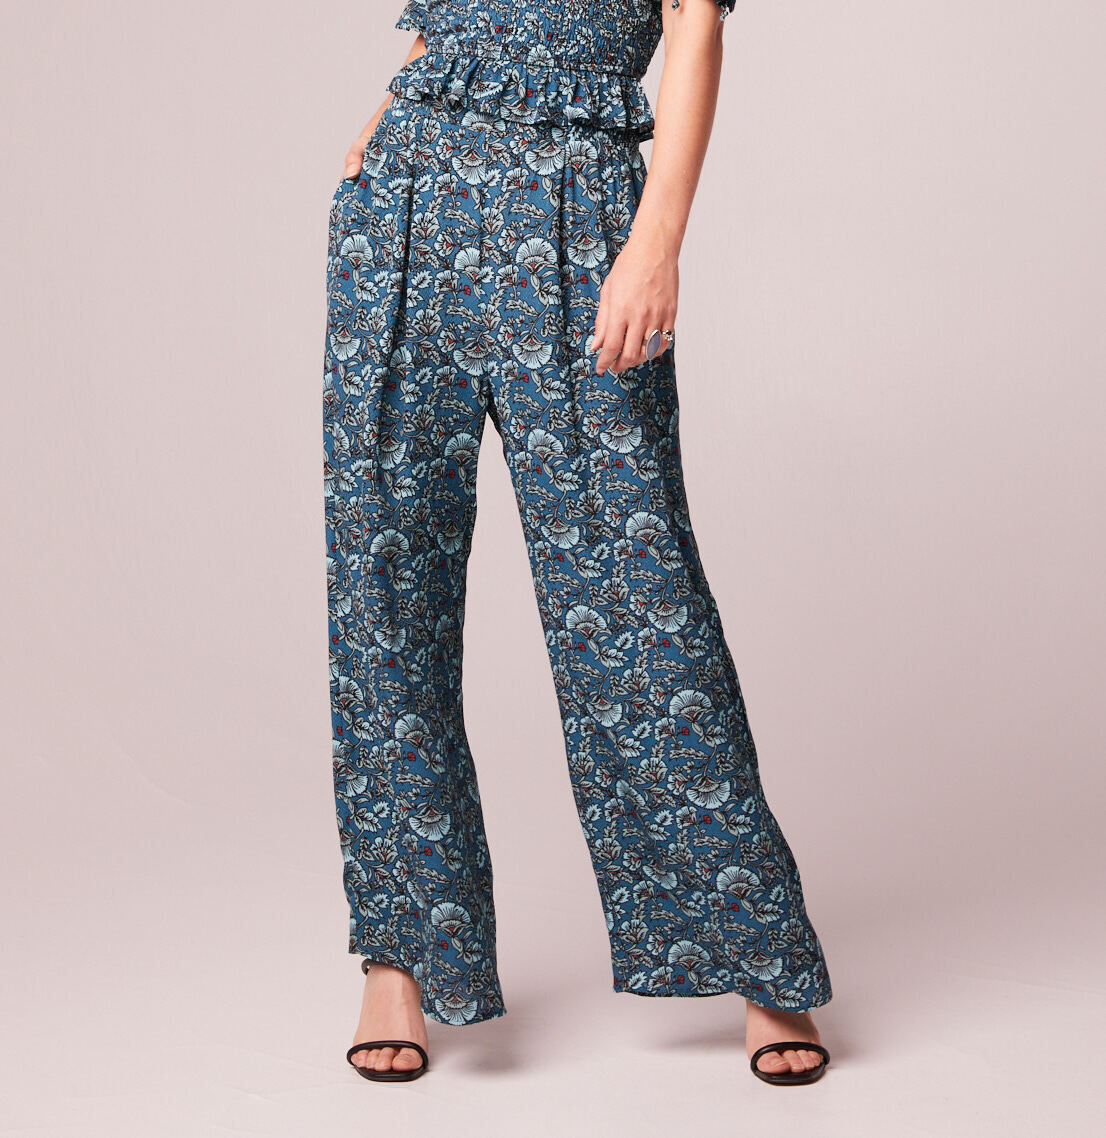 Band of the Free Elise Pant Deep Teal